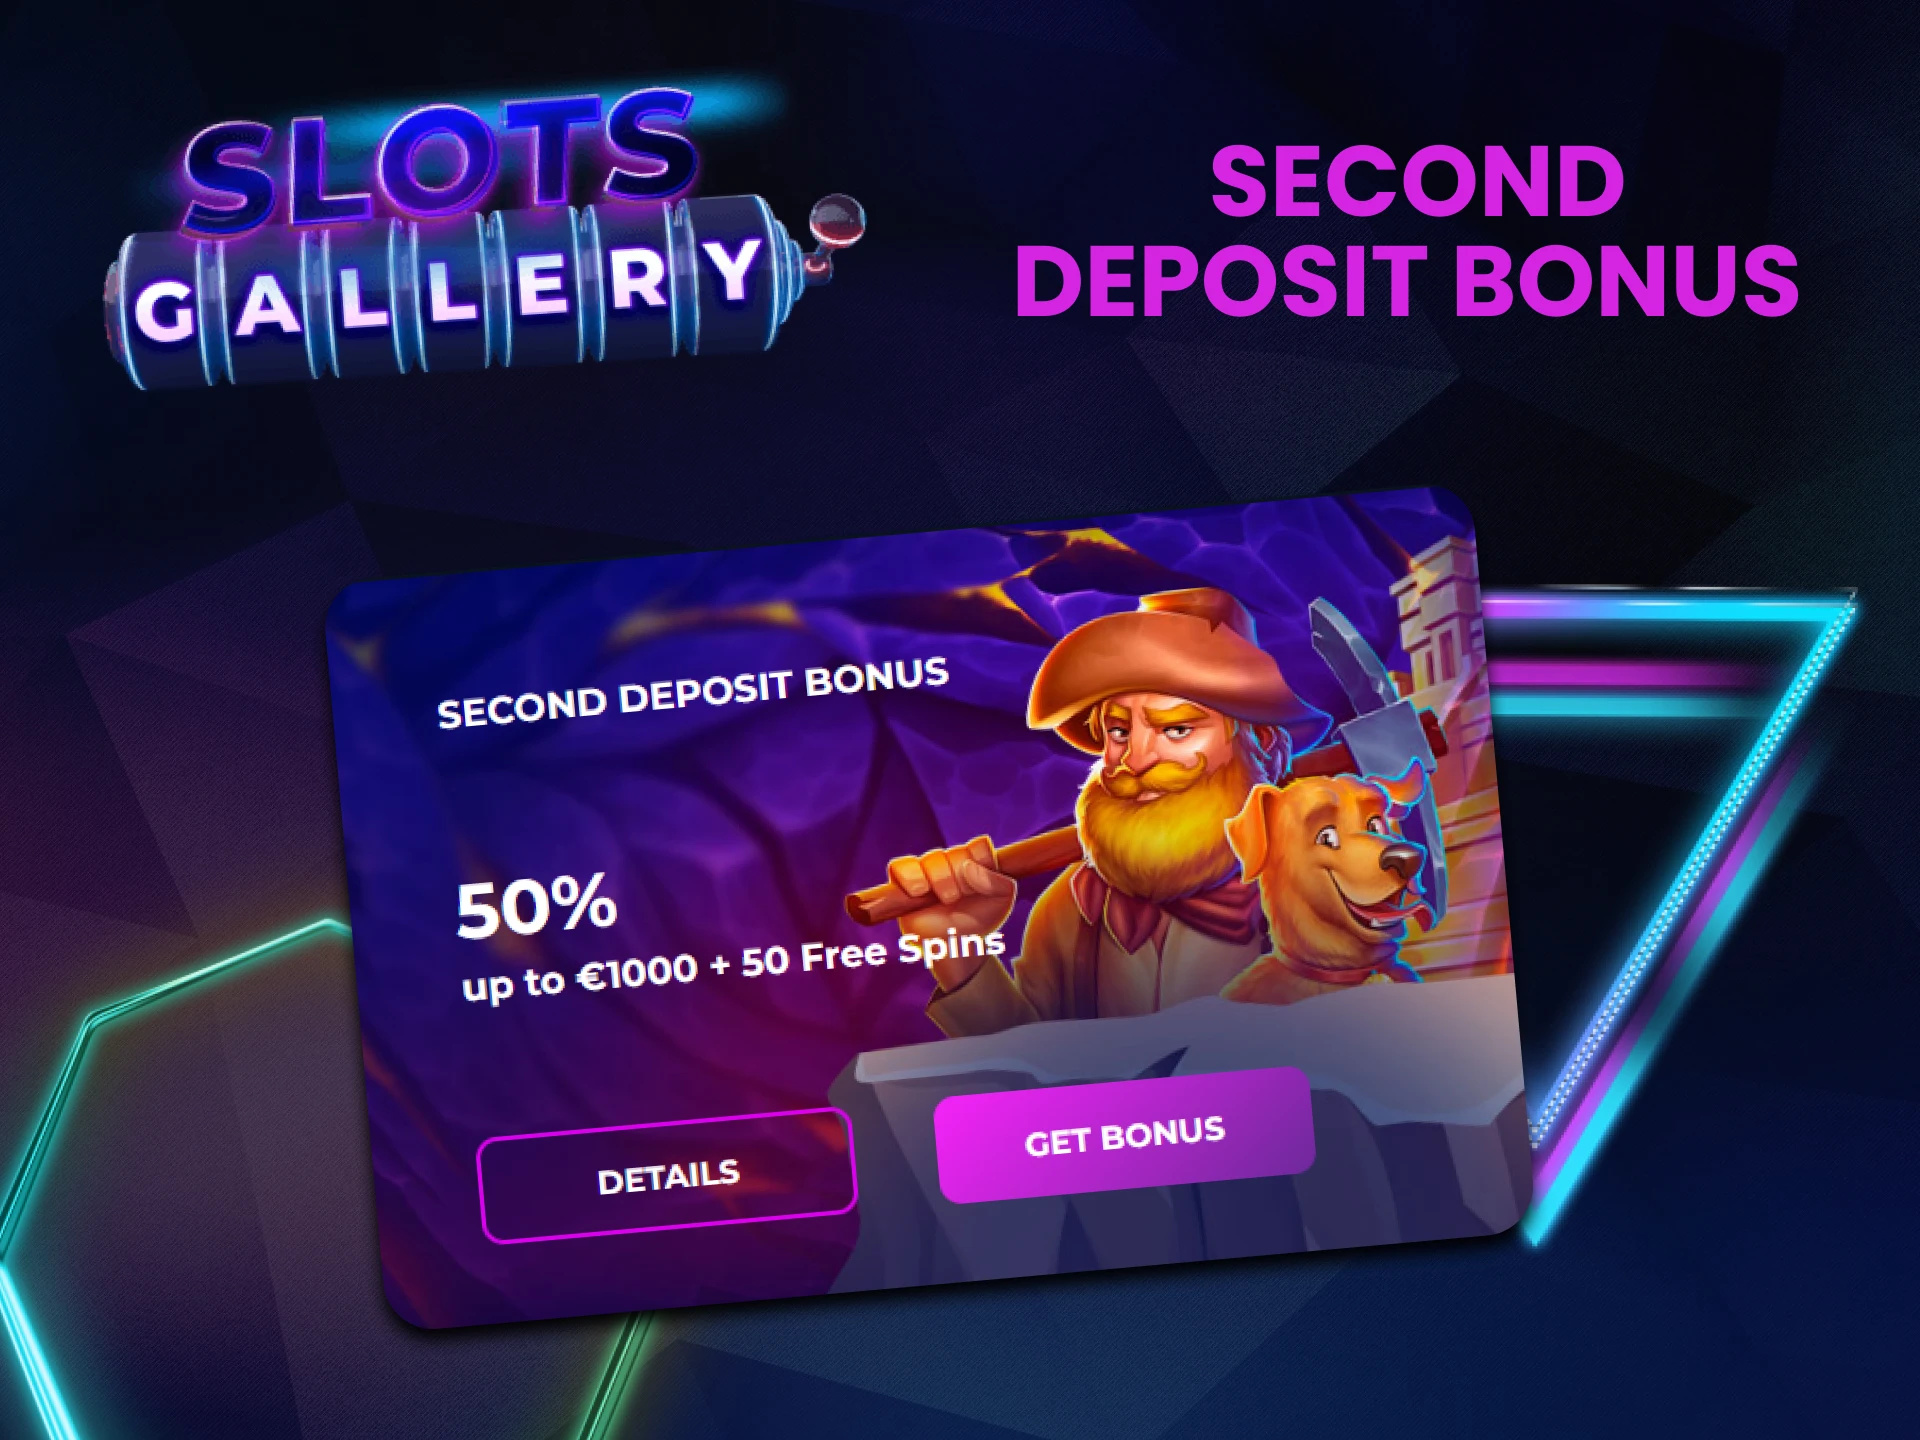 Slots Gallery gives a bonus for your second deposit.